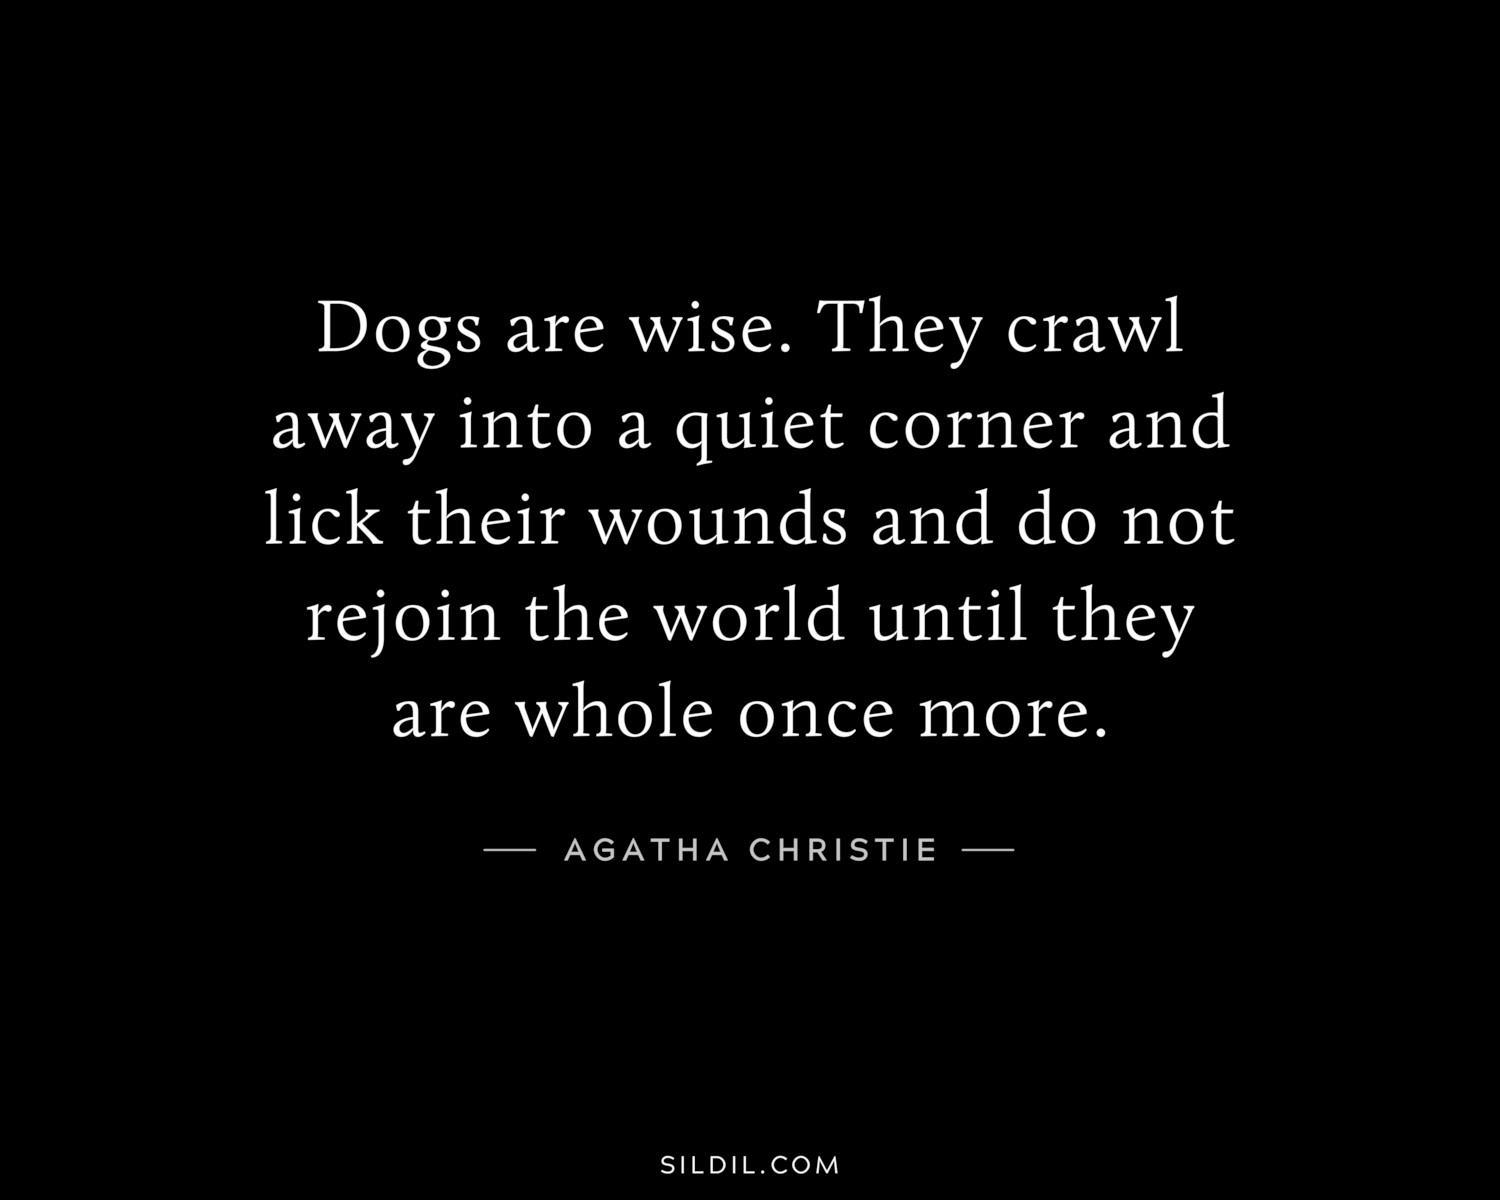 Dogs are wise. They crawl away into a quiet corner and lick their wounds and do not rejoin the world until they are whole once more.